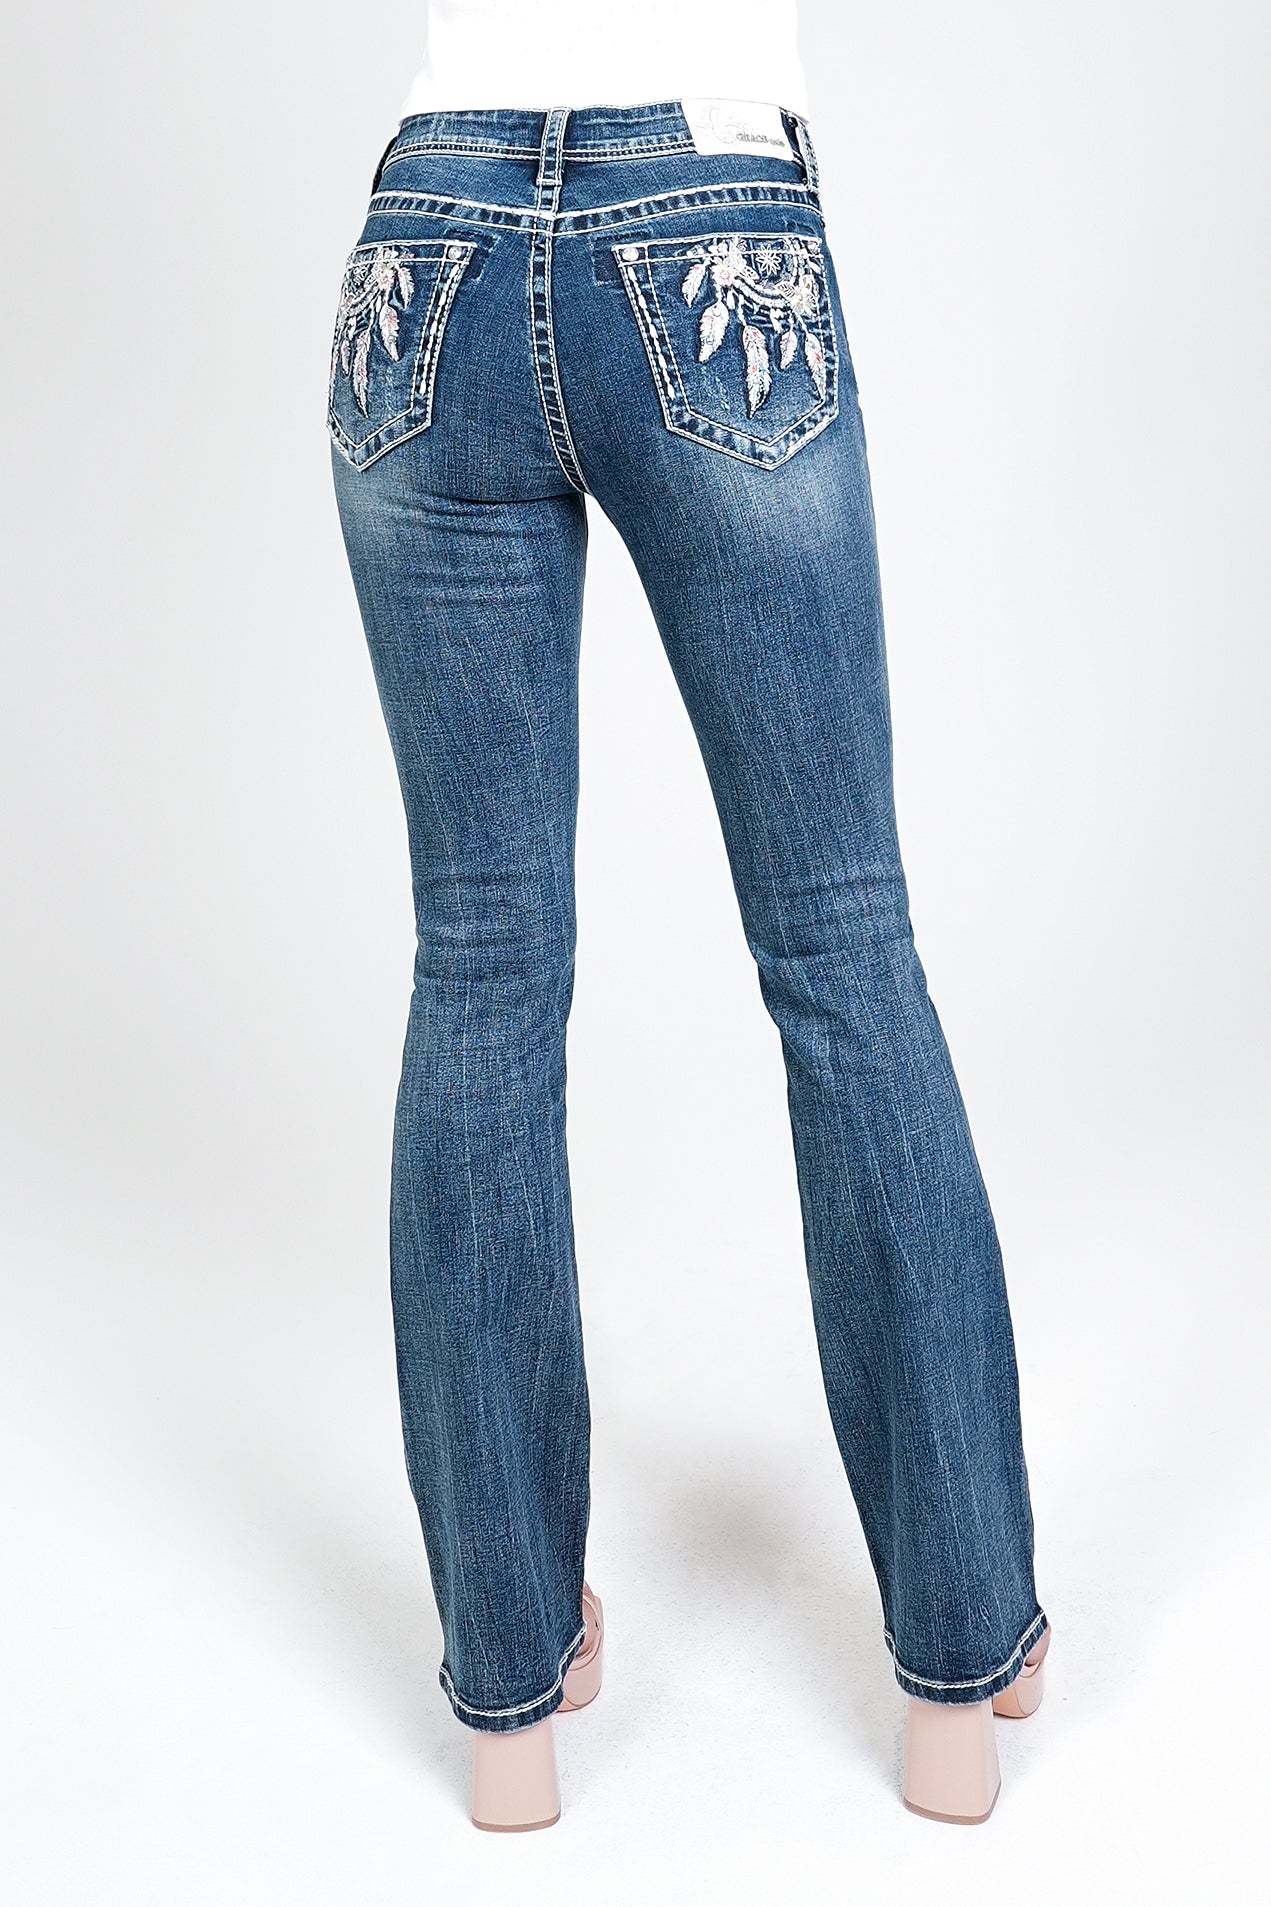 Dream Catcher Modify Embellished Mid Rise Bootcut Jeans